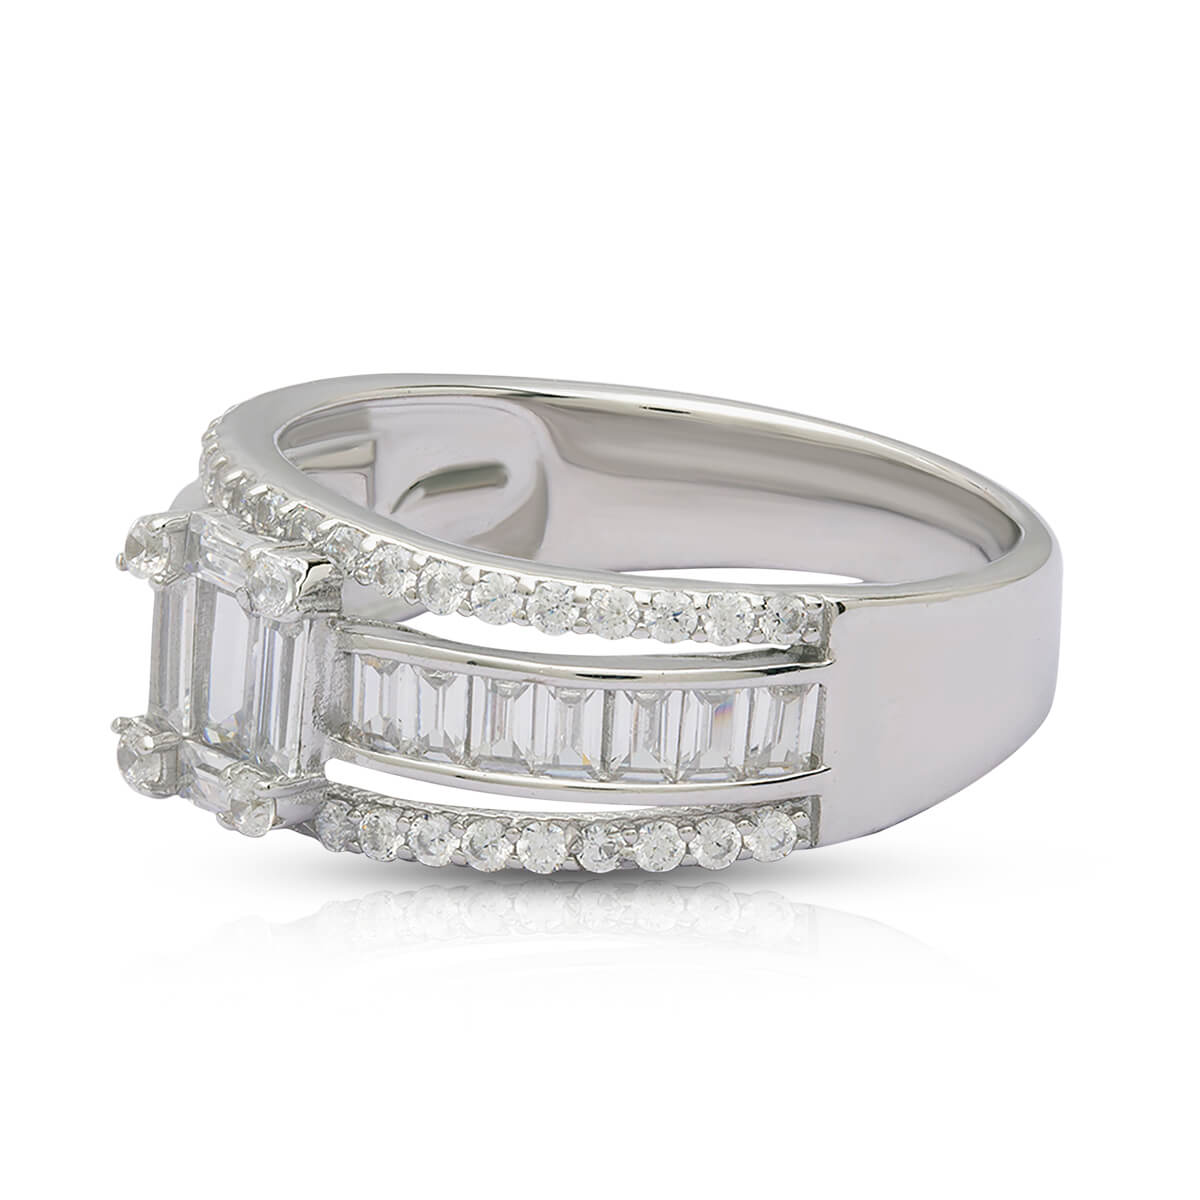 Glamorous Crystal Studded Silver Ring